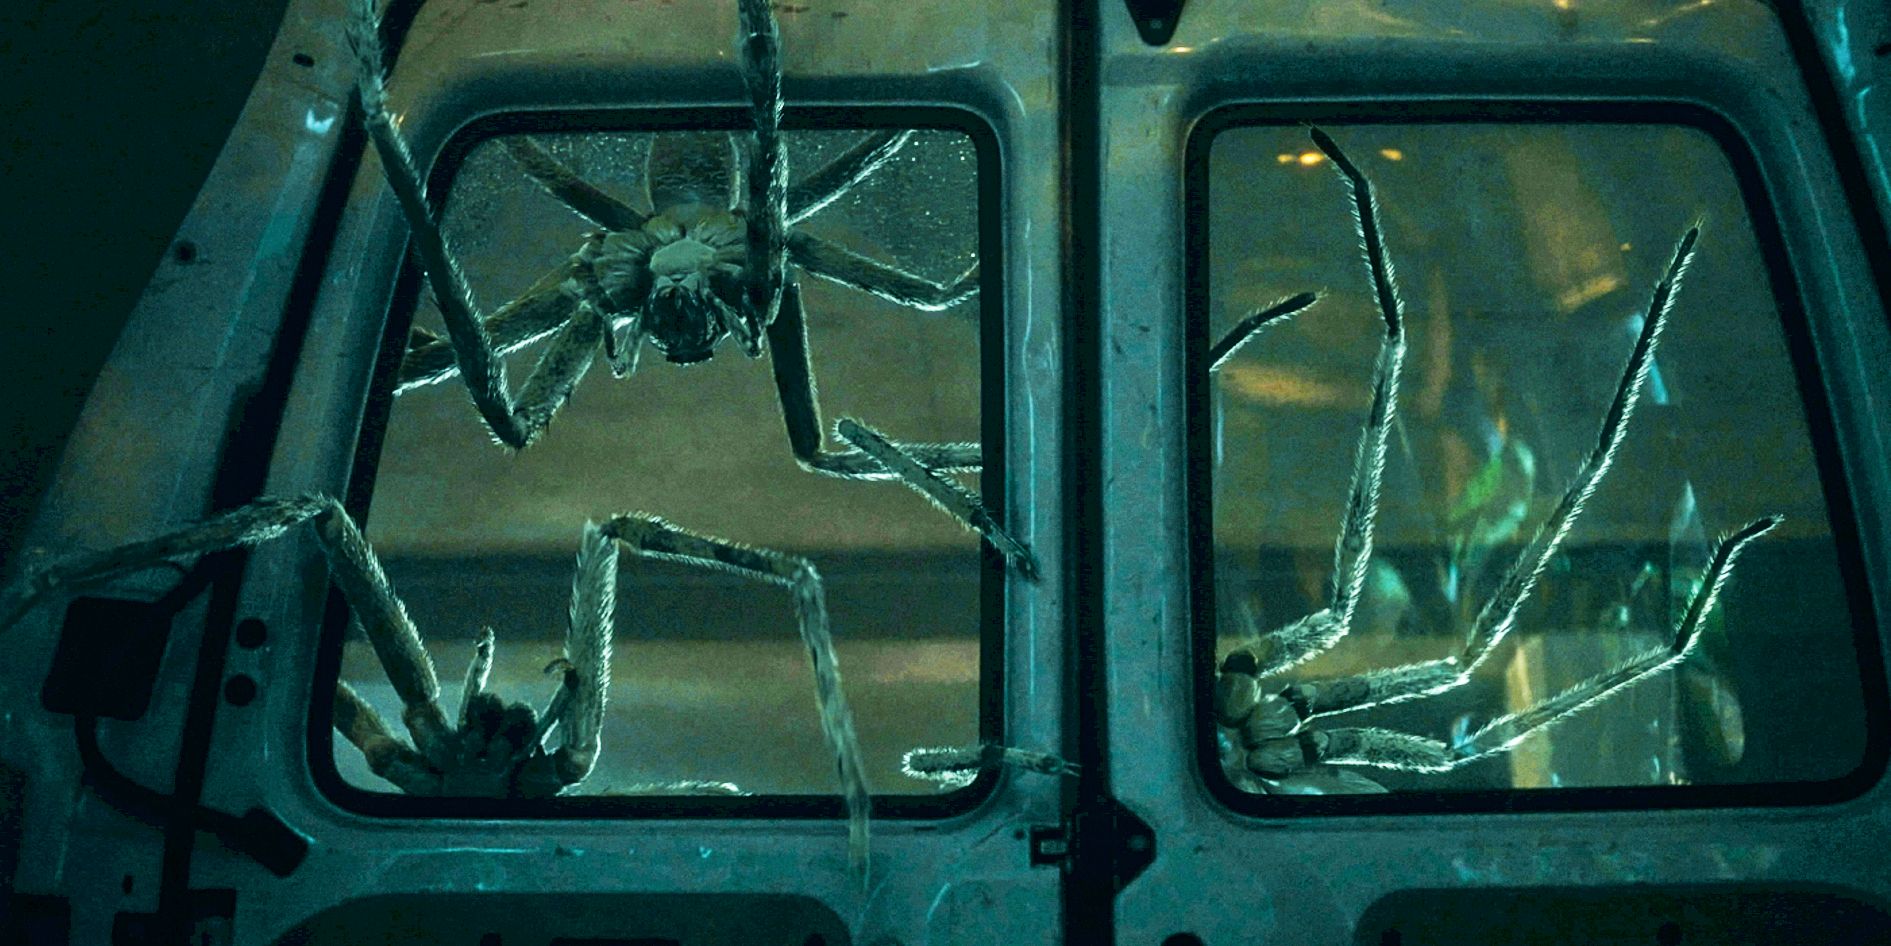 Infested Review: A Horror Movie About Spiders Made Me Feel Like It Was 2020 Again